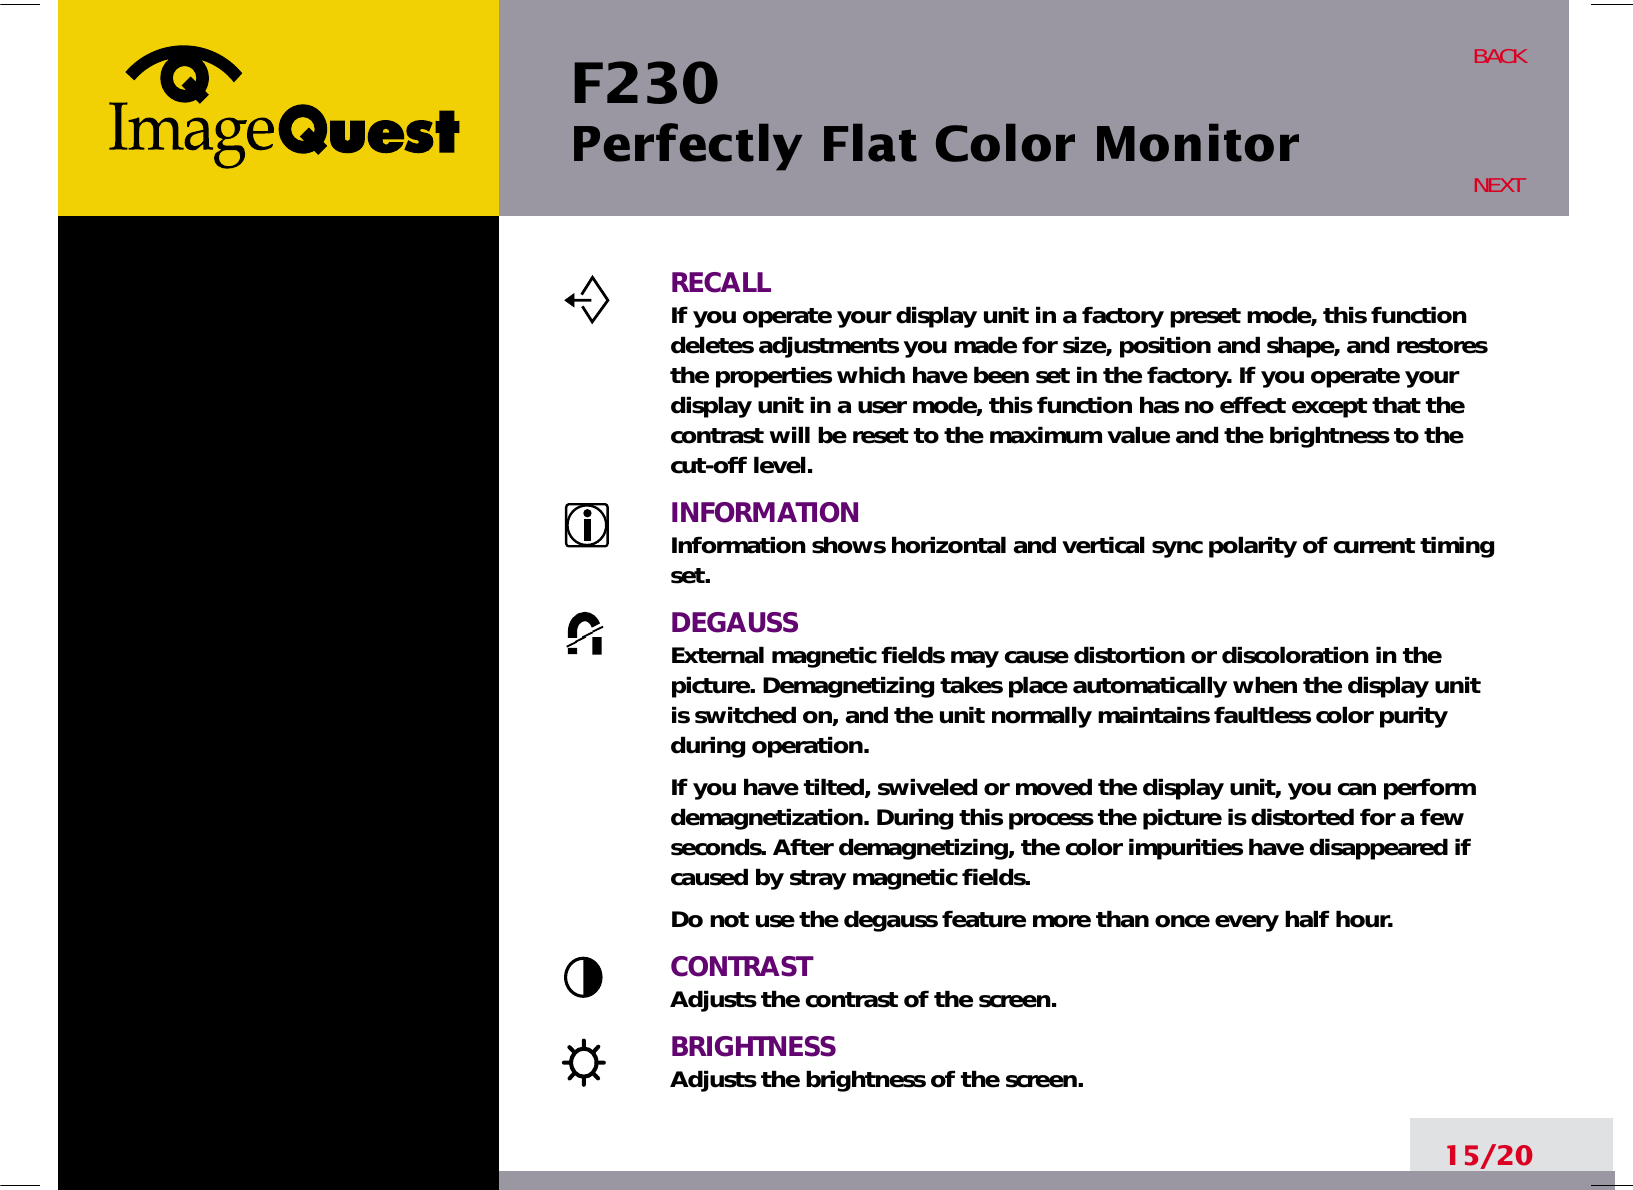 F230 Perfectly Flat Color Monitor15/20BACKNEXTRECALLIf you operate your display unit in a factory preset mode, this functiondeletes adjustments you made for size, position and shape, and restoresthe properties which have been set in the factory. If you operate yourdisplay unit in a user mode, this function has no effect except that thecontrast will be reset to the maximum value and the brightness to thecut-off level.INFORMATIONInformation shows horizontal and vertical sync polarity of current timingset.DEGAUSSExternal magnetic fields may cause distortion or discoloration in thepicture. Demagnetizing takes place automatically when the display unitis switched on, and the unit normally maintains faultless color purityduring operation.If you have tilted, swiveled or moved the display unit, you can performdemagnetization. During this process the picture is distorted for a fewseconds. After demagnetizing, the color impurities have disappeared ifcaused by stray magnetic fields. Do not use the degauss feature more than once every half hour.CONTRASTAdjusts the contrast of the screen.BRIGHTNESSAdjusts the brightness of the screen.